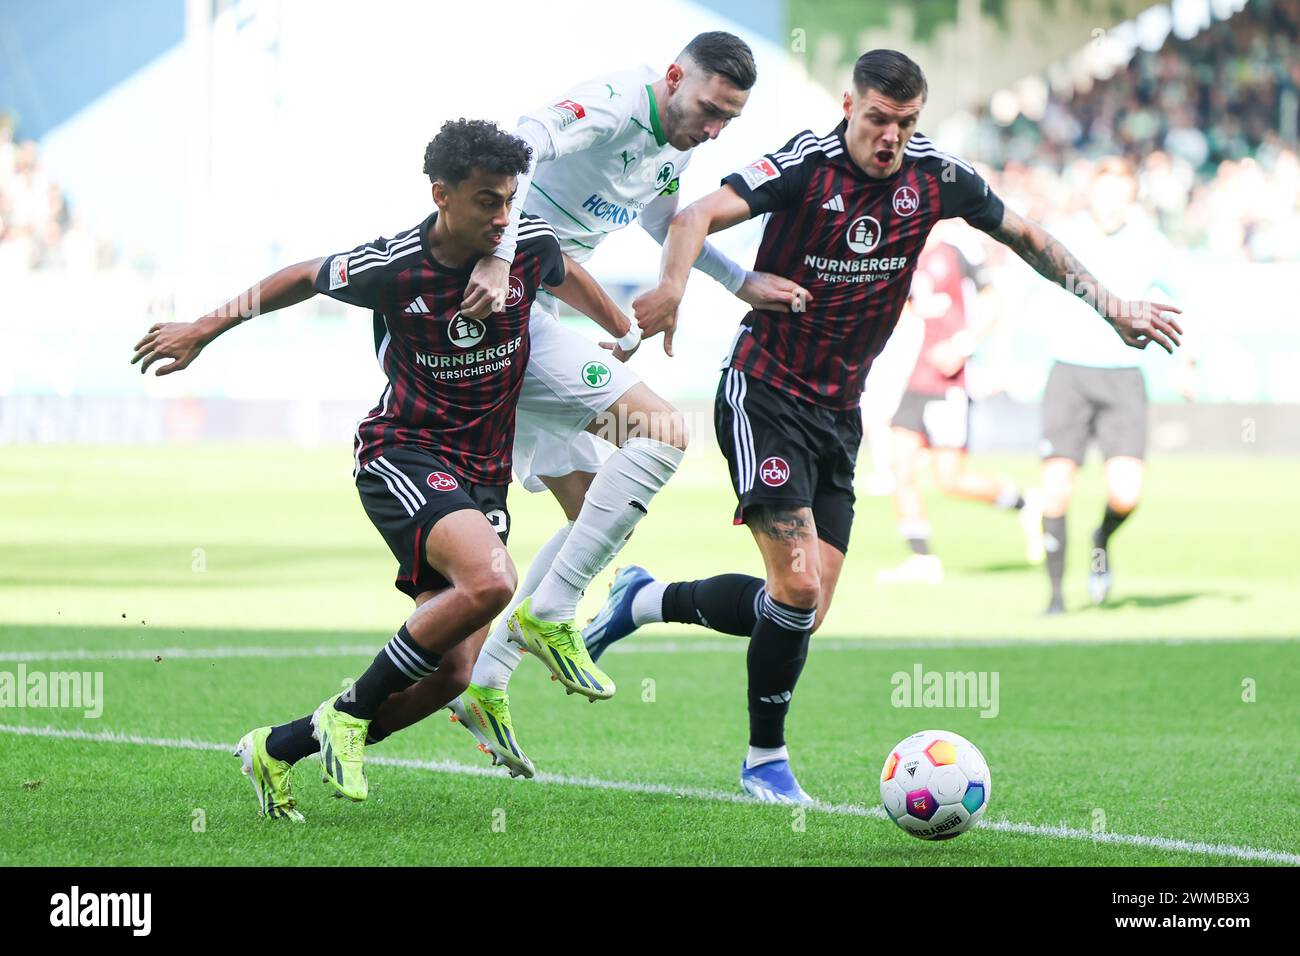 25 February 2024, Bavaria, Fürth: Soccer: Bundesliga 2, SpVgg Greuther Fürth - 1. FC Nürnberg, Matchday 23 at Sportpark Ronhof Thomas Sommer. Fürth's Branimir Hrgota (center) battles for the ball with Nuremberg's Nathaniel Brown (left) and Erik Wekesser. Photo: Daniel Karmann/dpa - IMPORTANT NOTE: In accordance with the regulations of the DFL German Football League and the DFB German Football Association, it is prohibited to utilize or have utilized photographs taken in the stadium and/or of the match in the form of sequential images and/or video-like photo series. Stock Photo